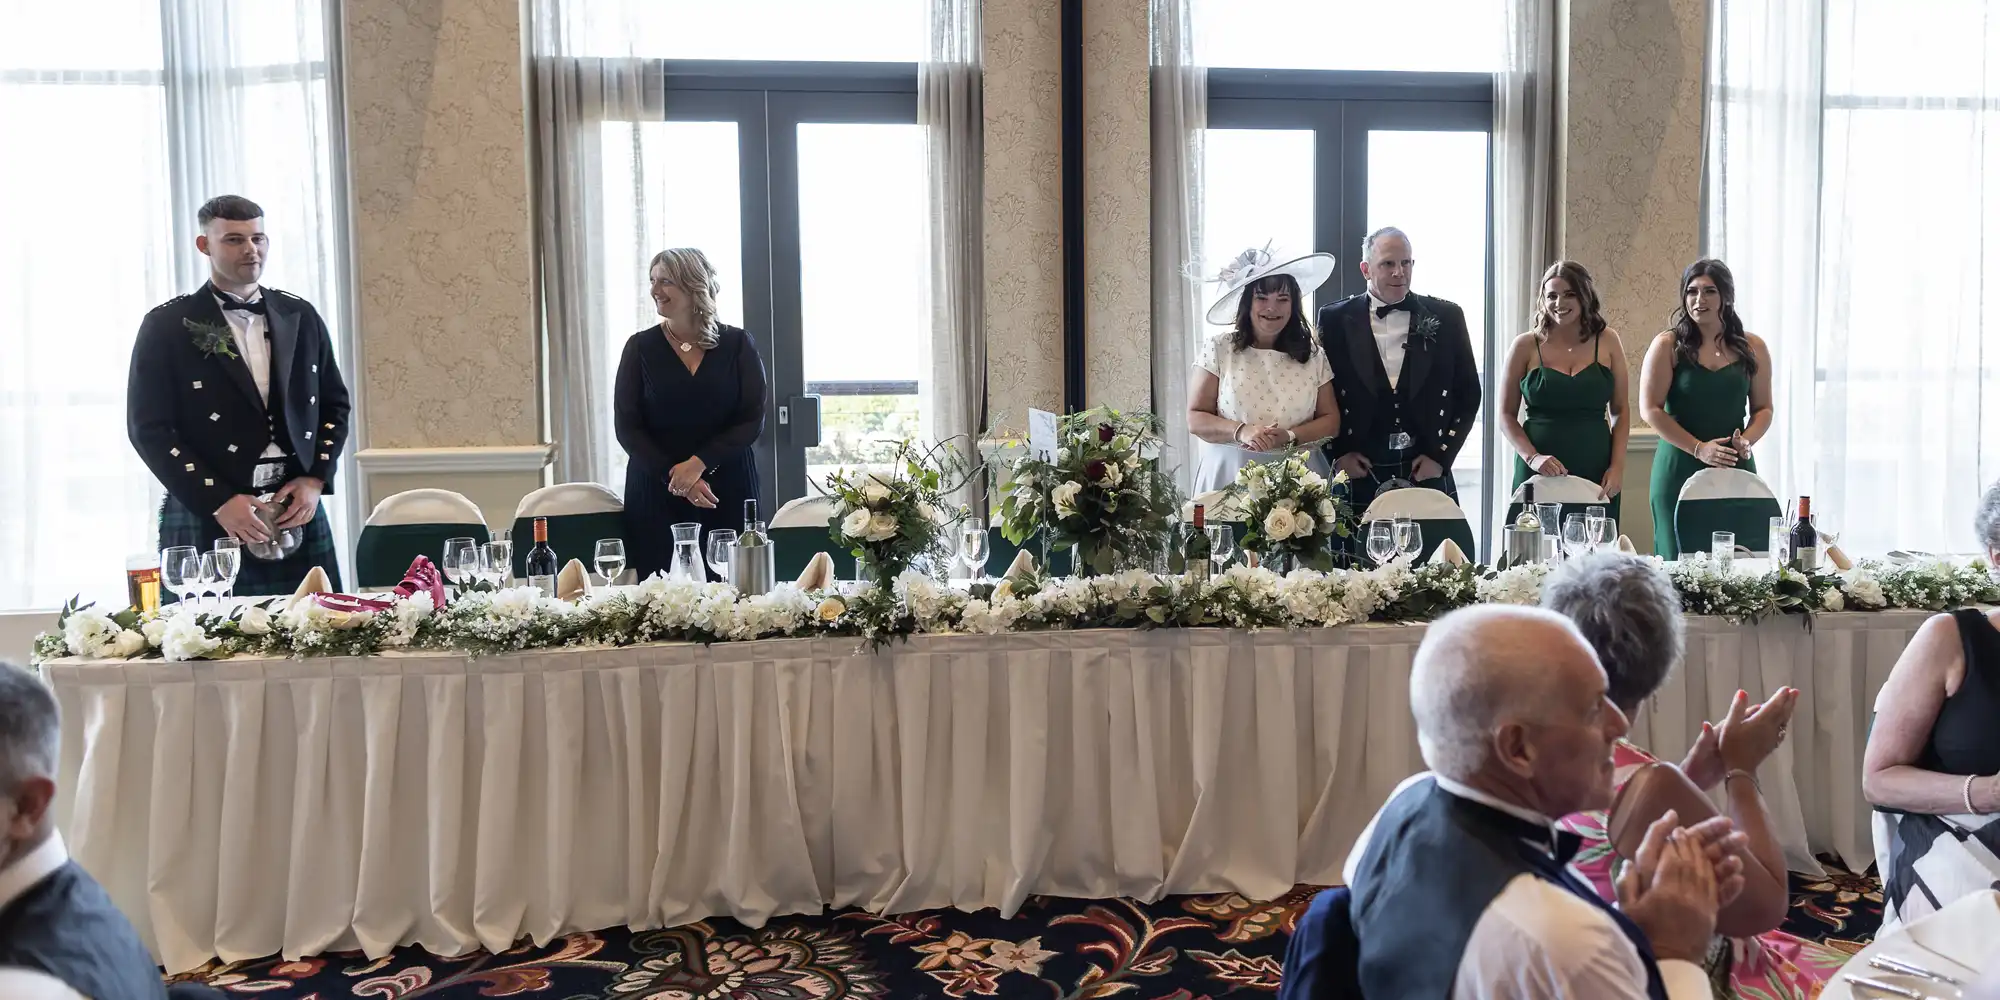 A wedding head table with a bridal party standing as guests applaud, featuring elegant floral decorations.